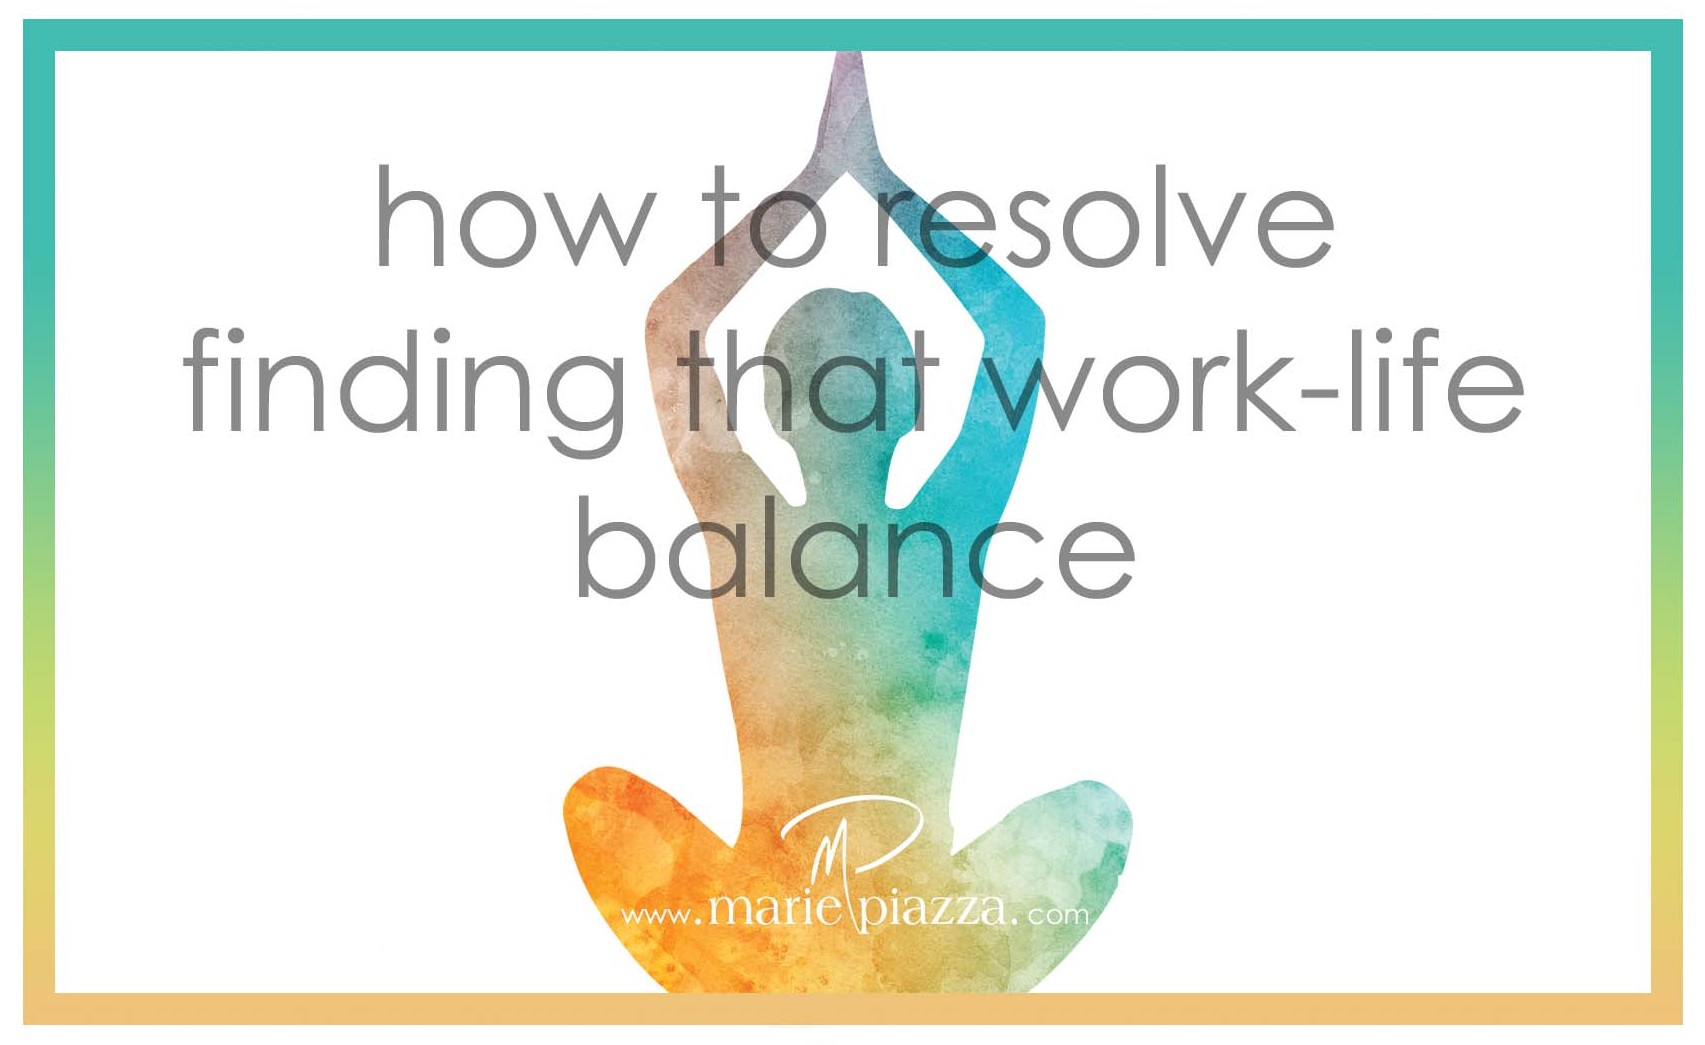 How to resolve finding that work-life balance